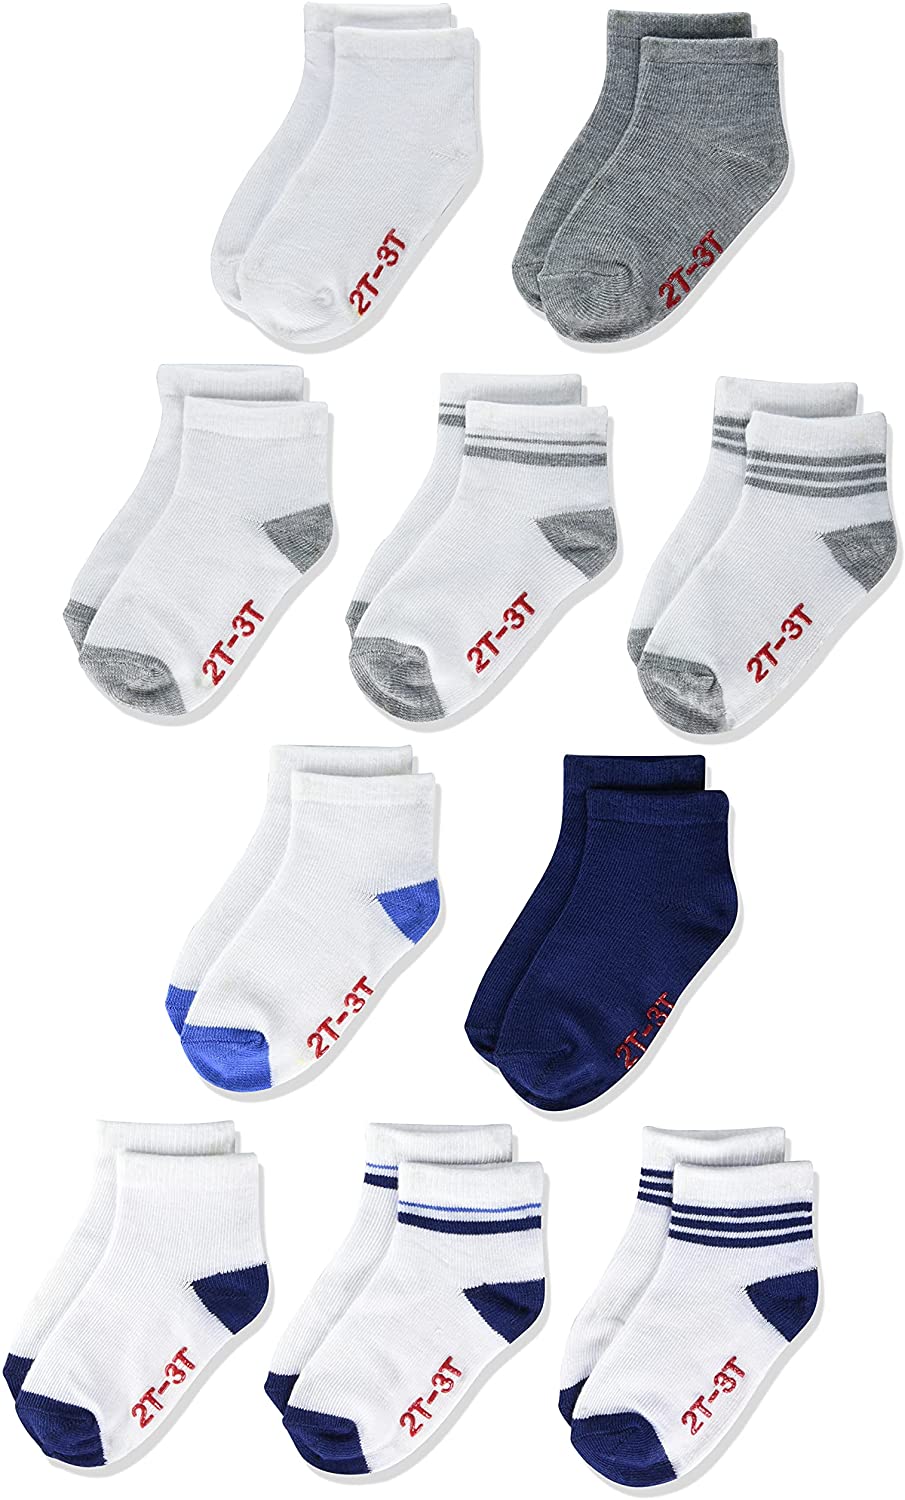 Assorted 6 months 4/5T 6-Pair Pack Hanes Infant Boys Ankle Socks 